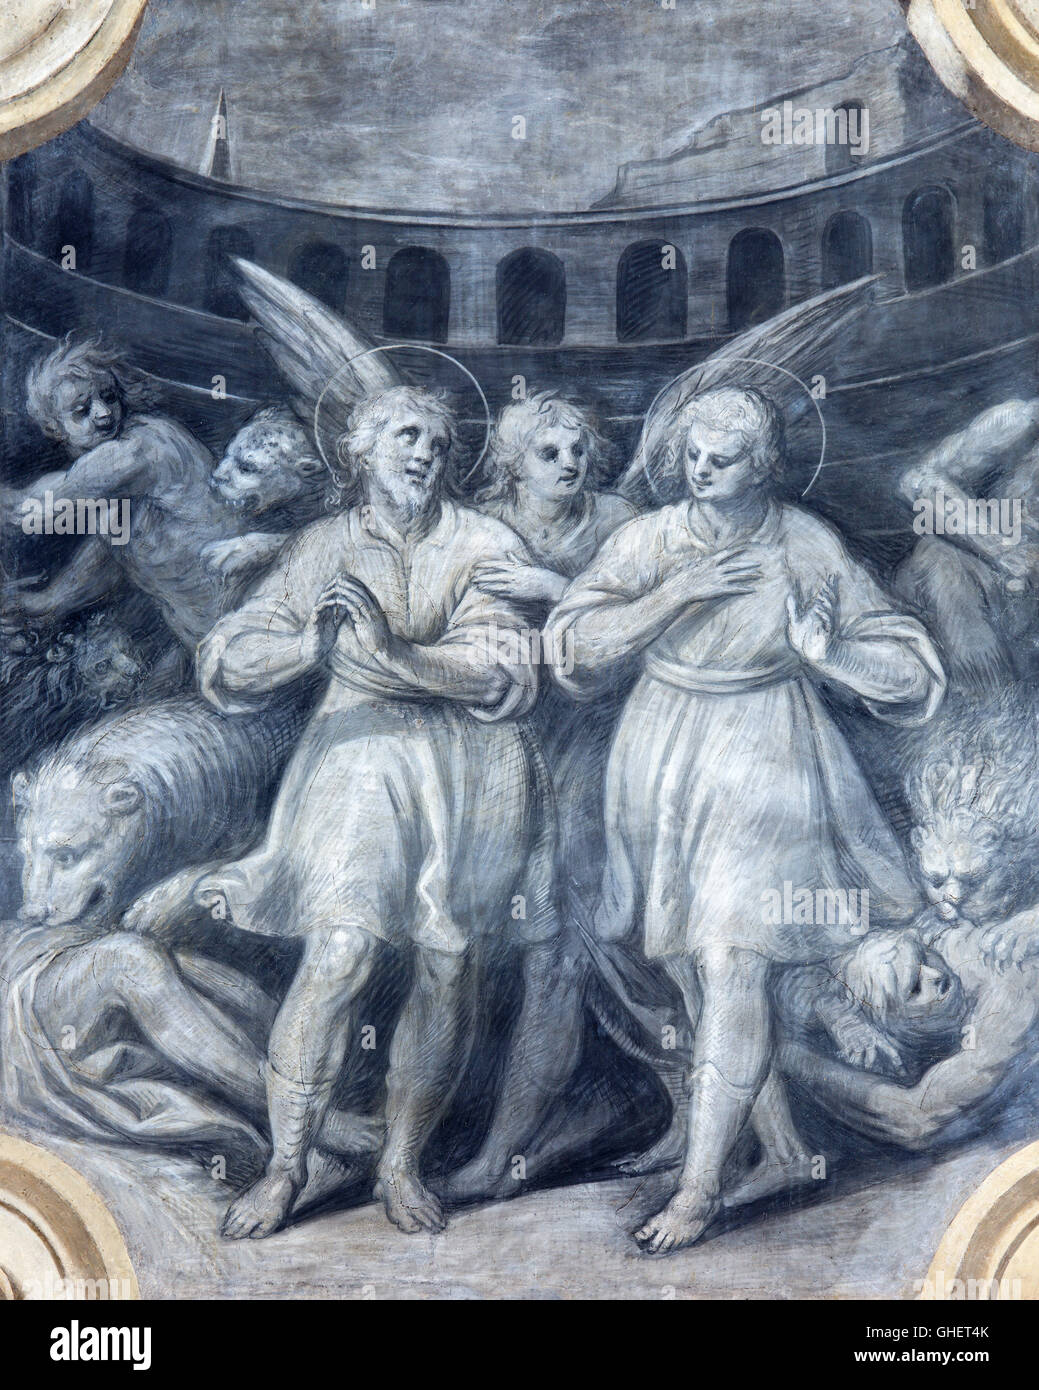 BRESCIA, ITALY - MAY 23, 2016: The monochromatic fresco of First christian martyrs among the lions in colosseum Stock Photo